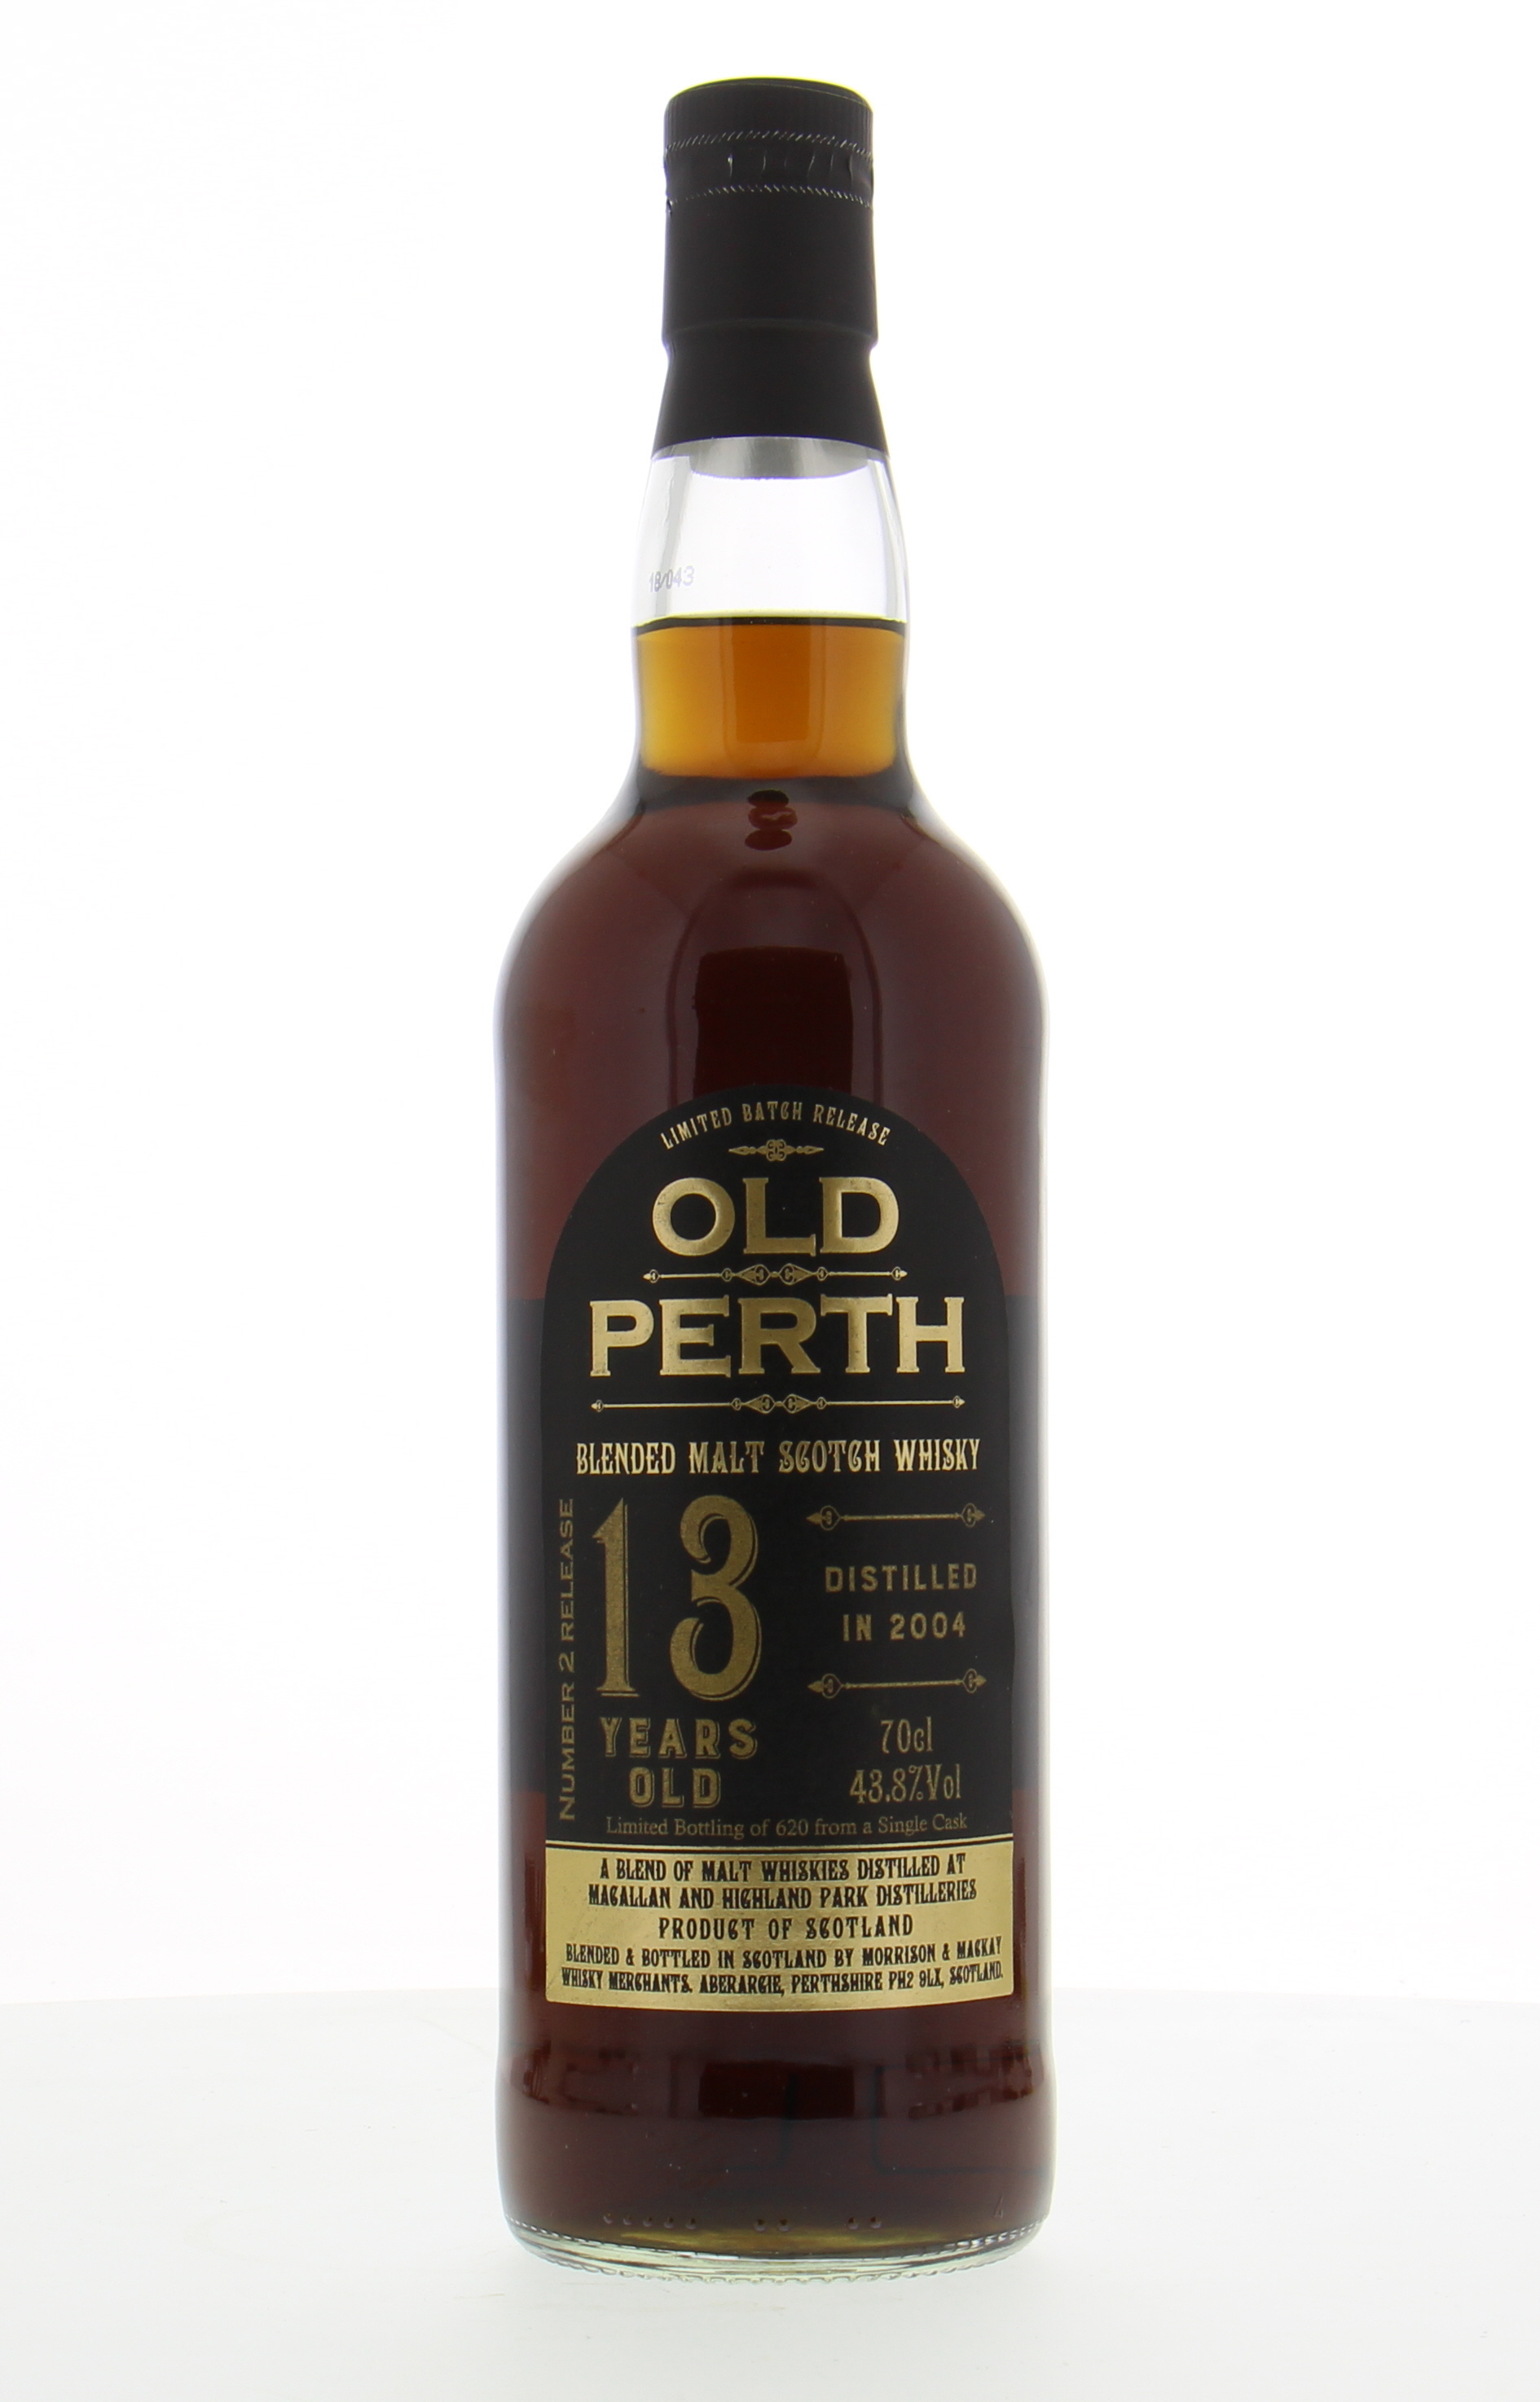 Old Perth - 13 Years Old 43.8% NV 10016